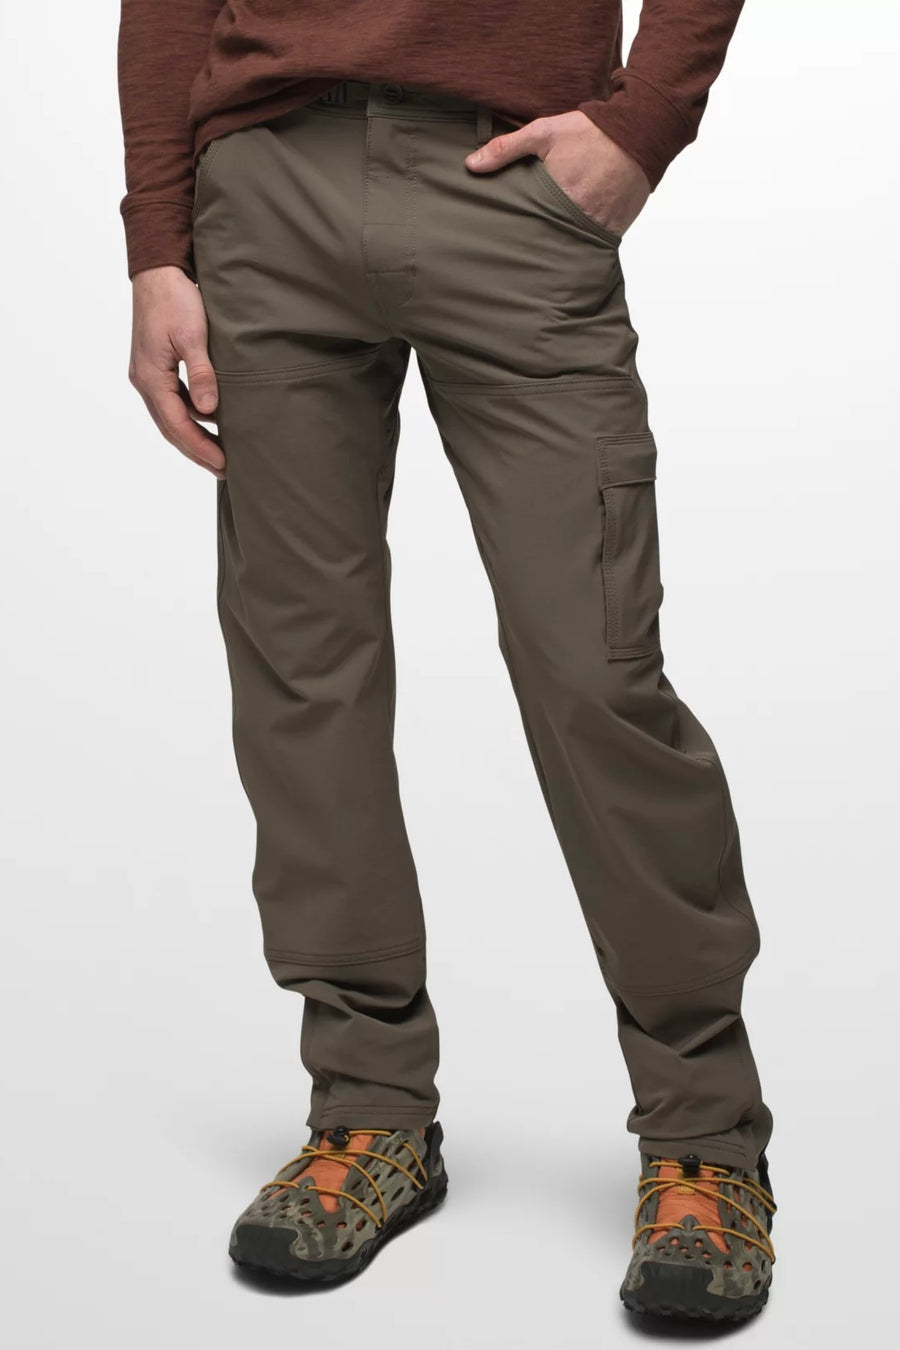 Stretch Zion AT Pant - Men's 32" Inseam